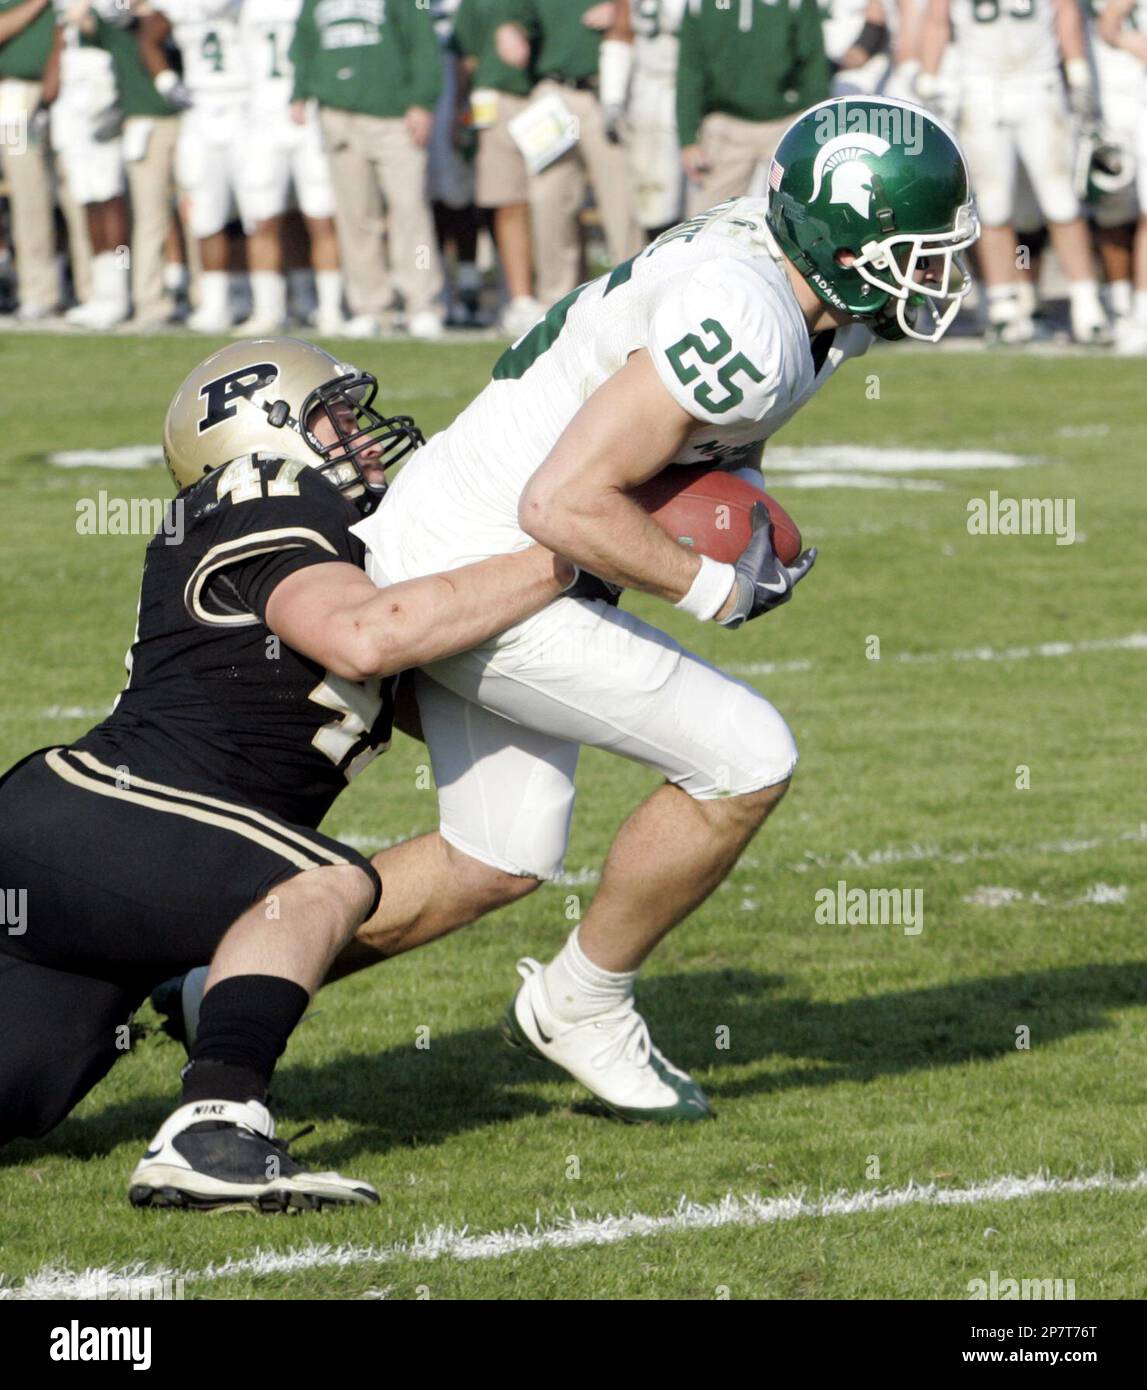 Michigan State wide receiver Blair White (25) drags Purdue linebacker Chris  Carlino (47) across the goal line as he scores on a 9-yard pass play in the  fourth quarter of an NCAA